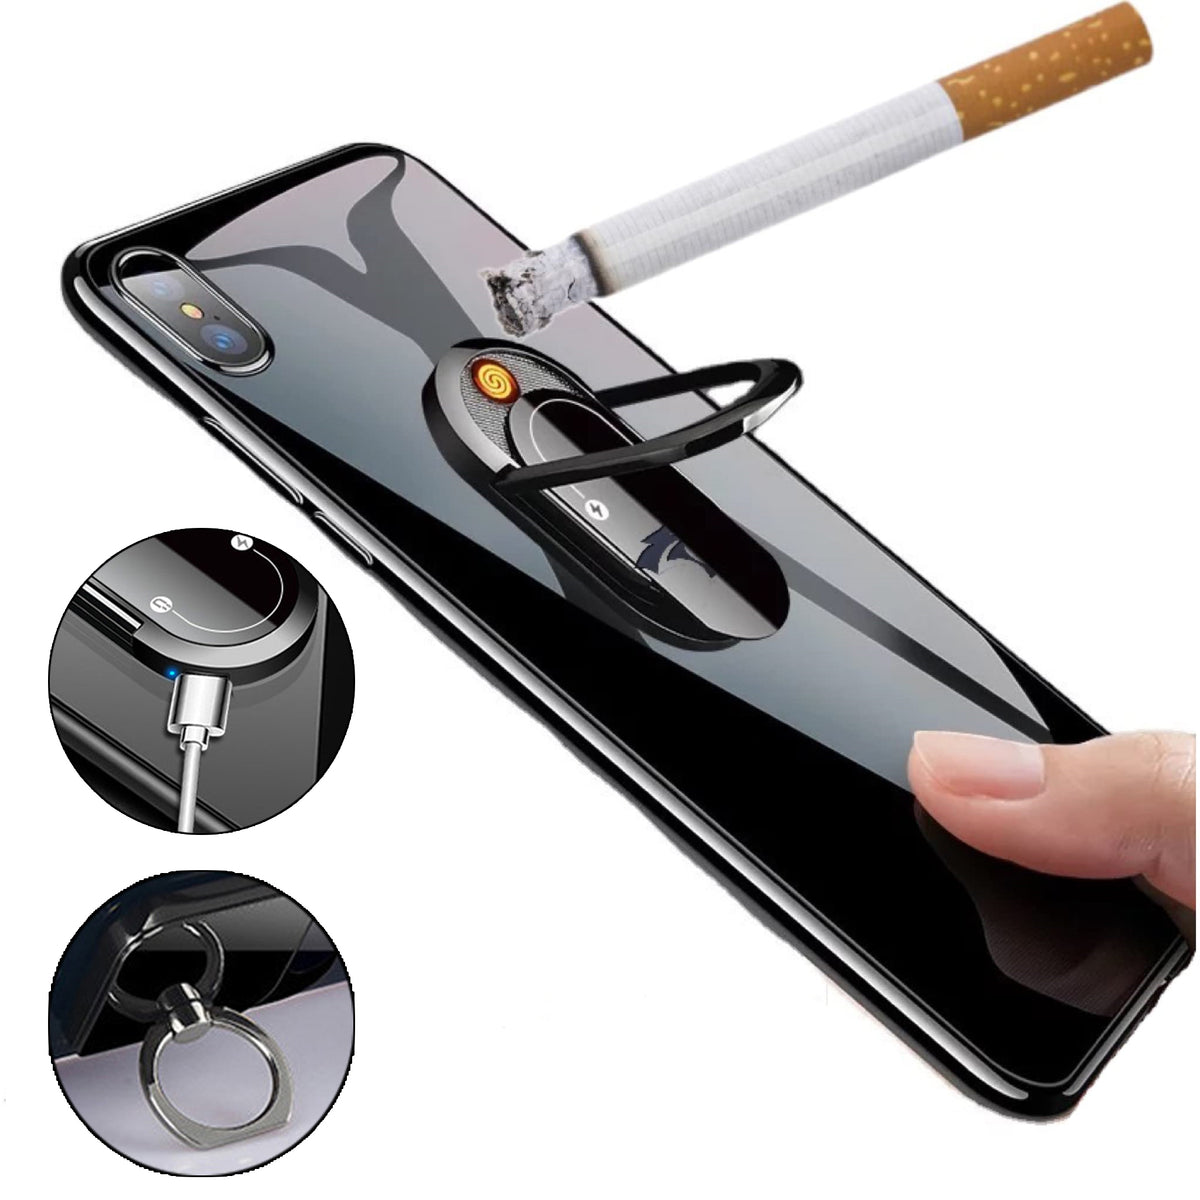 2 In 1 Portable Creative USB Plasma Lighter Mobile Phone Holder Multi-function Cigarette Lighter - Collections By Jay